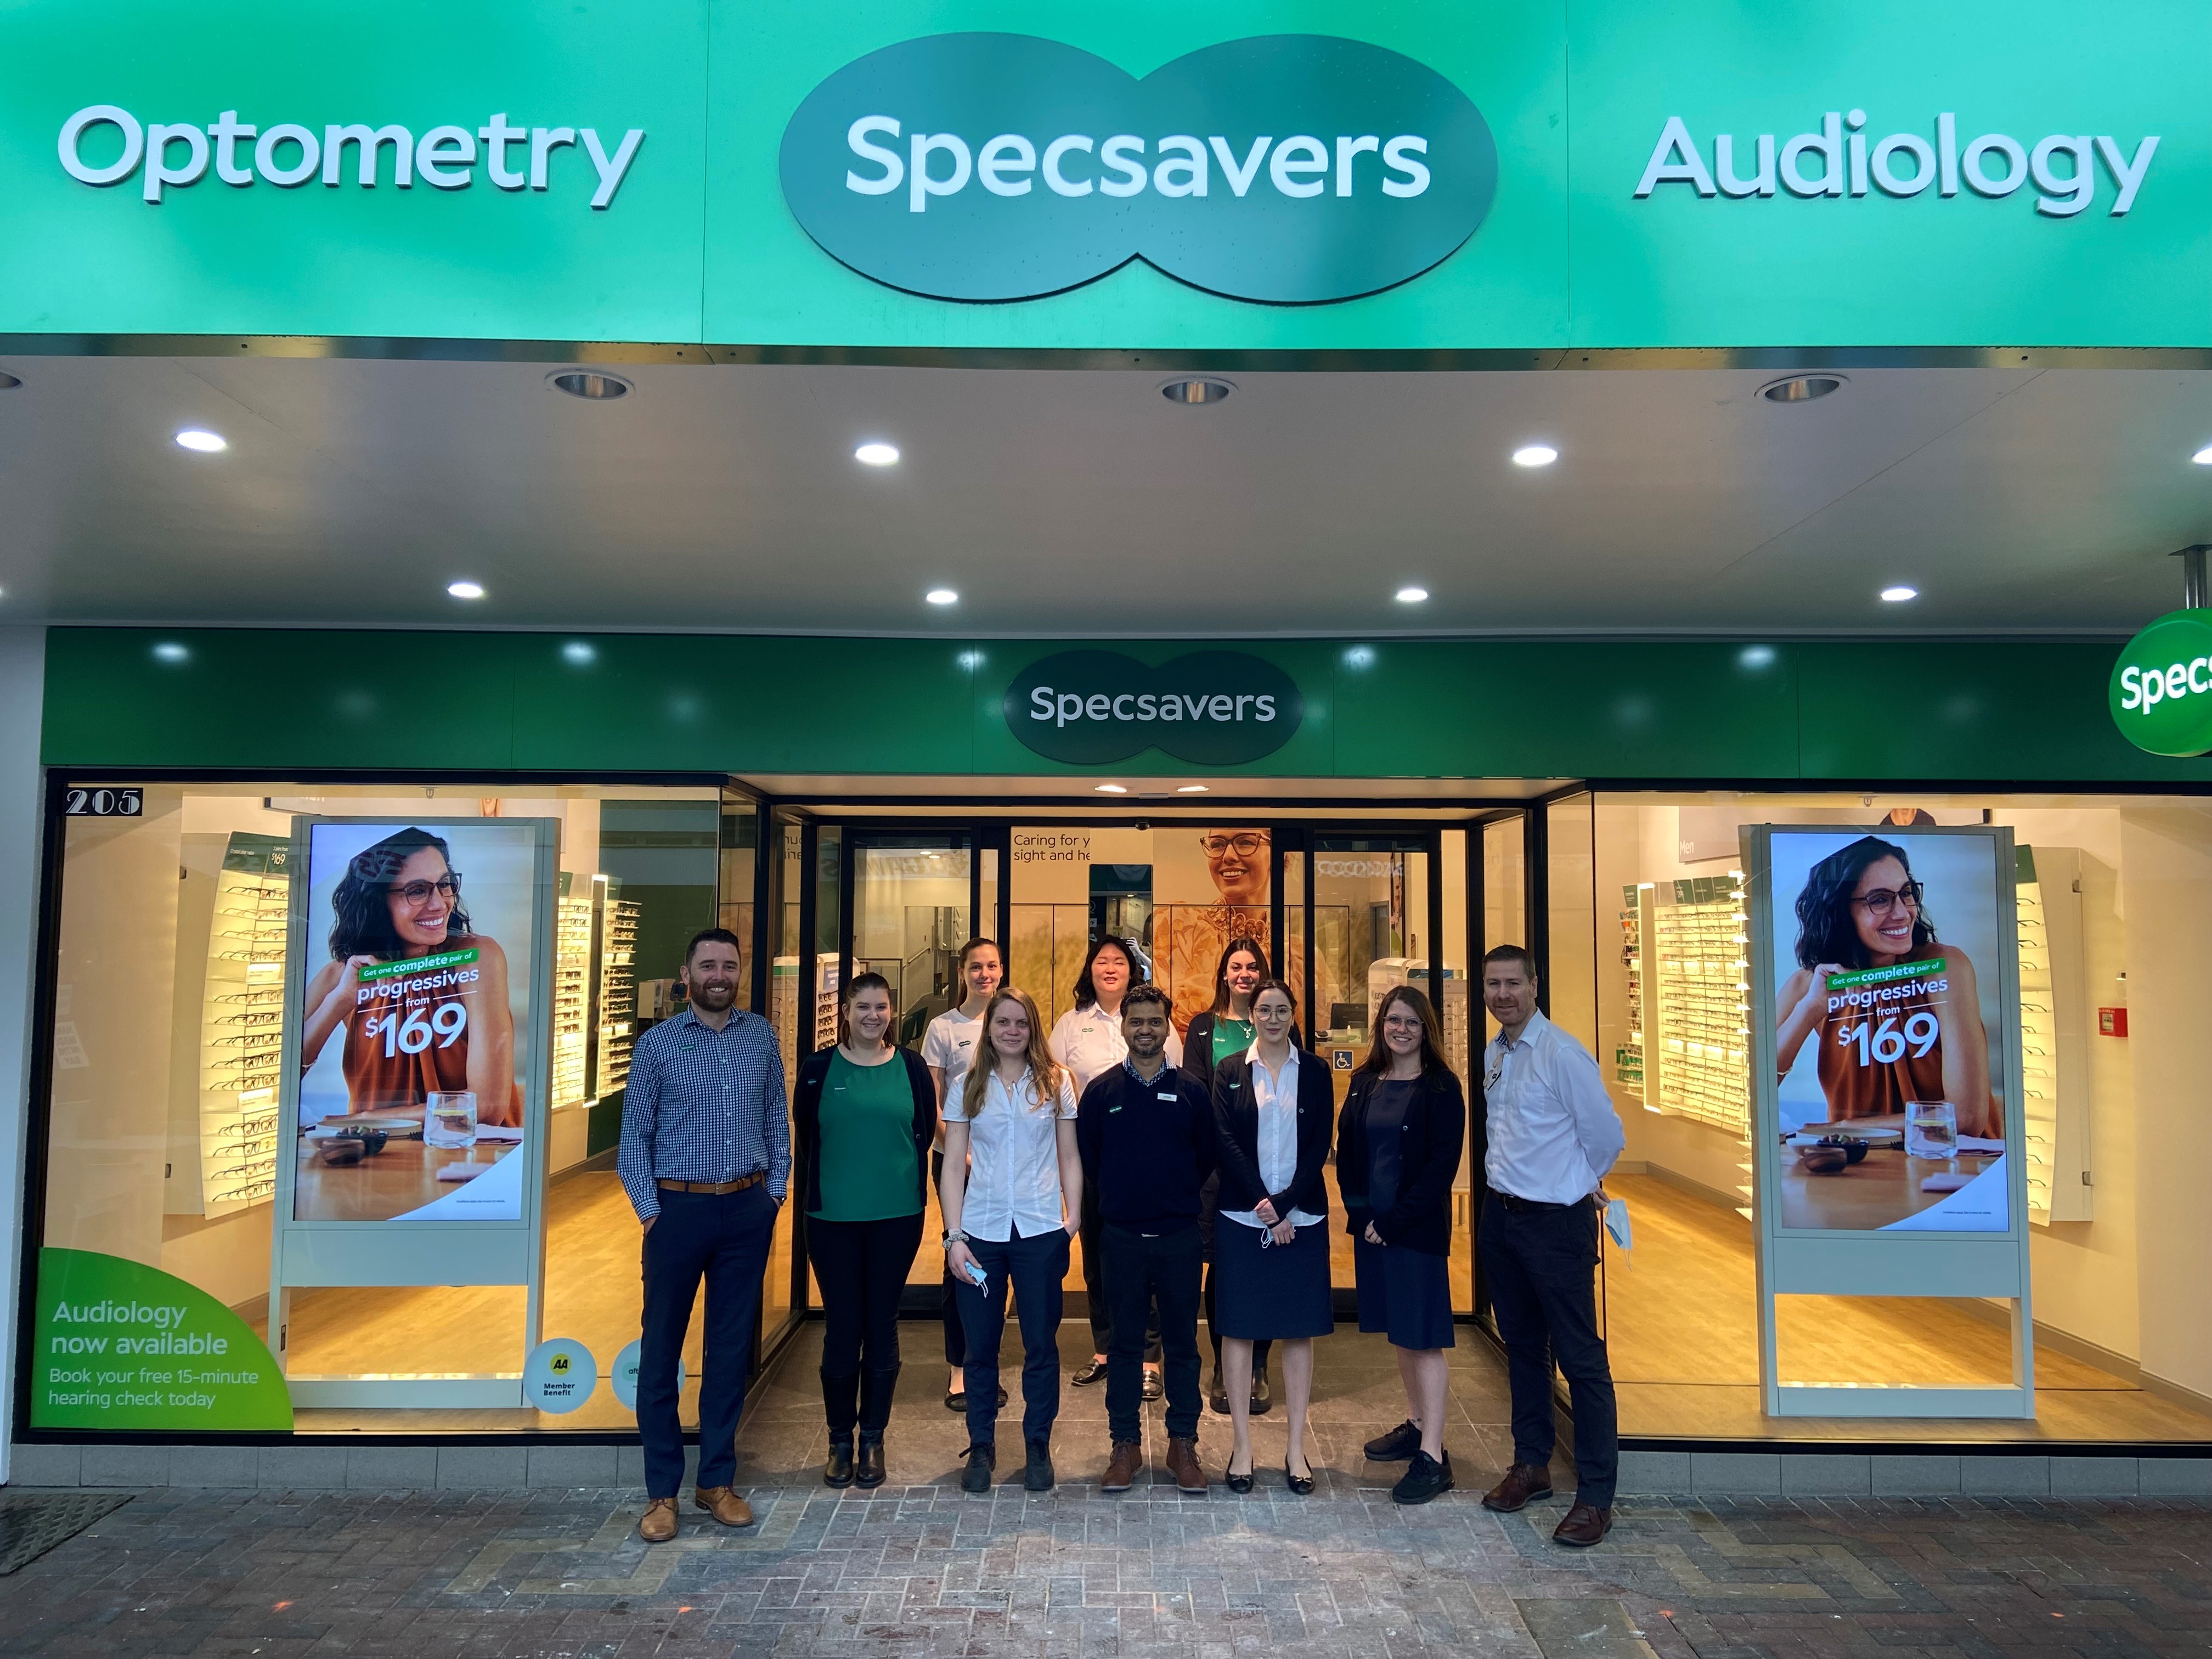 Images Specsavers Optometrists & Audiology - Napier